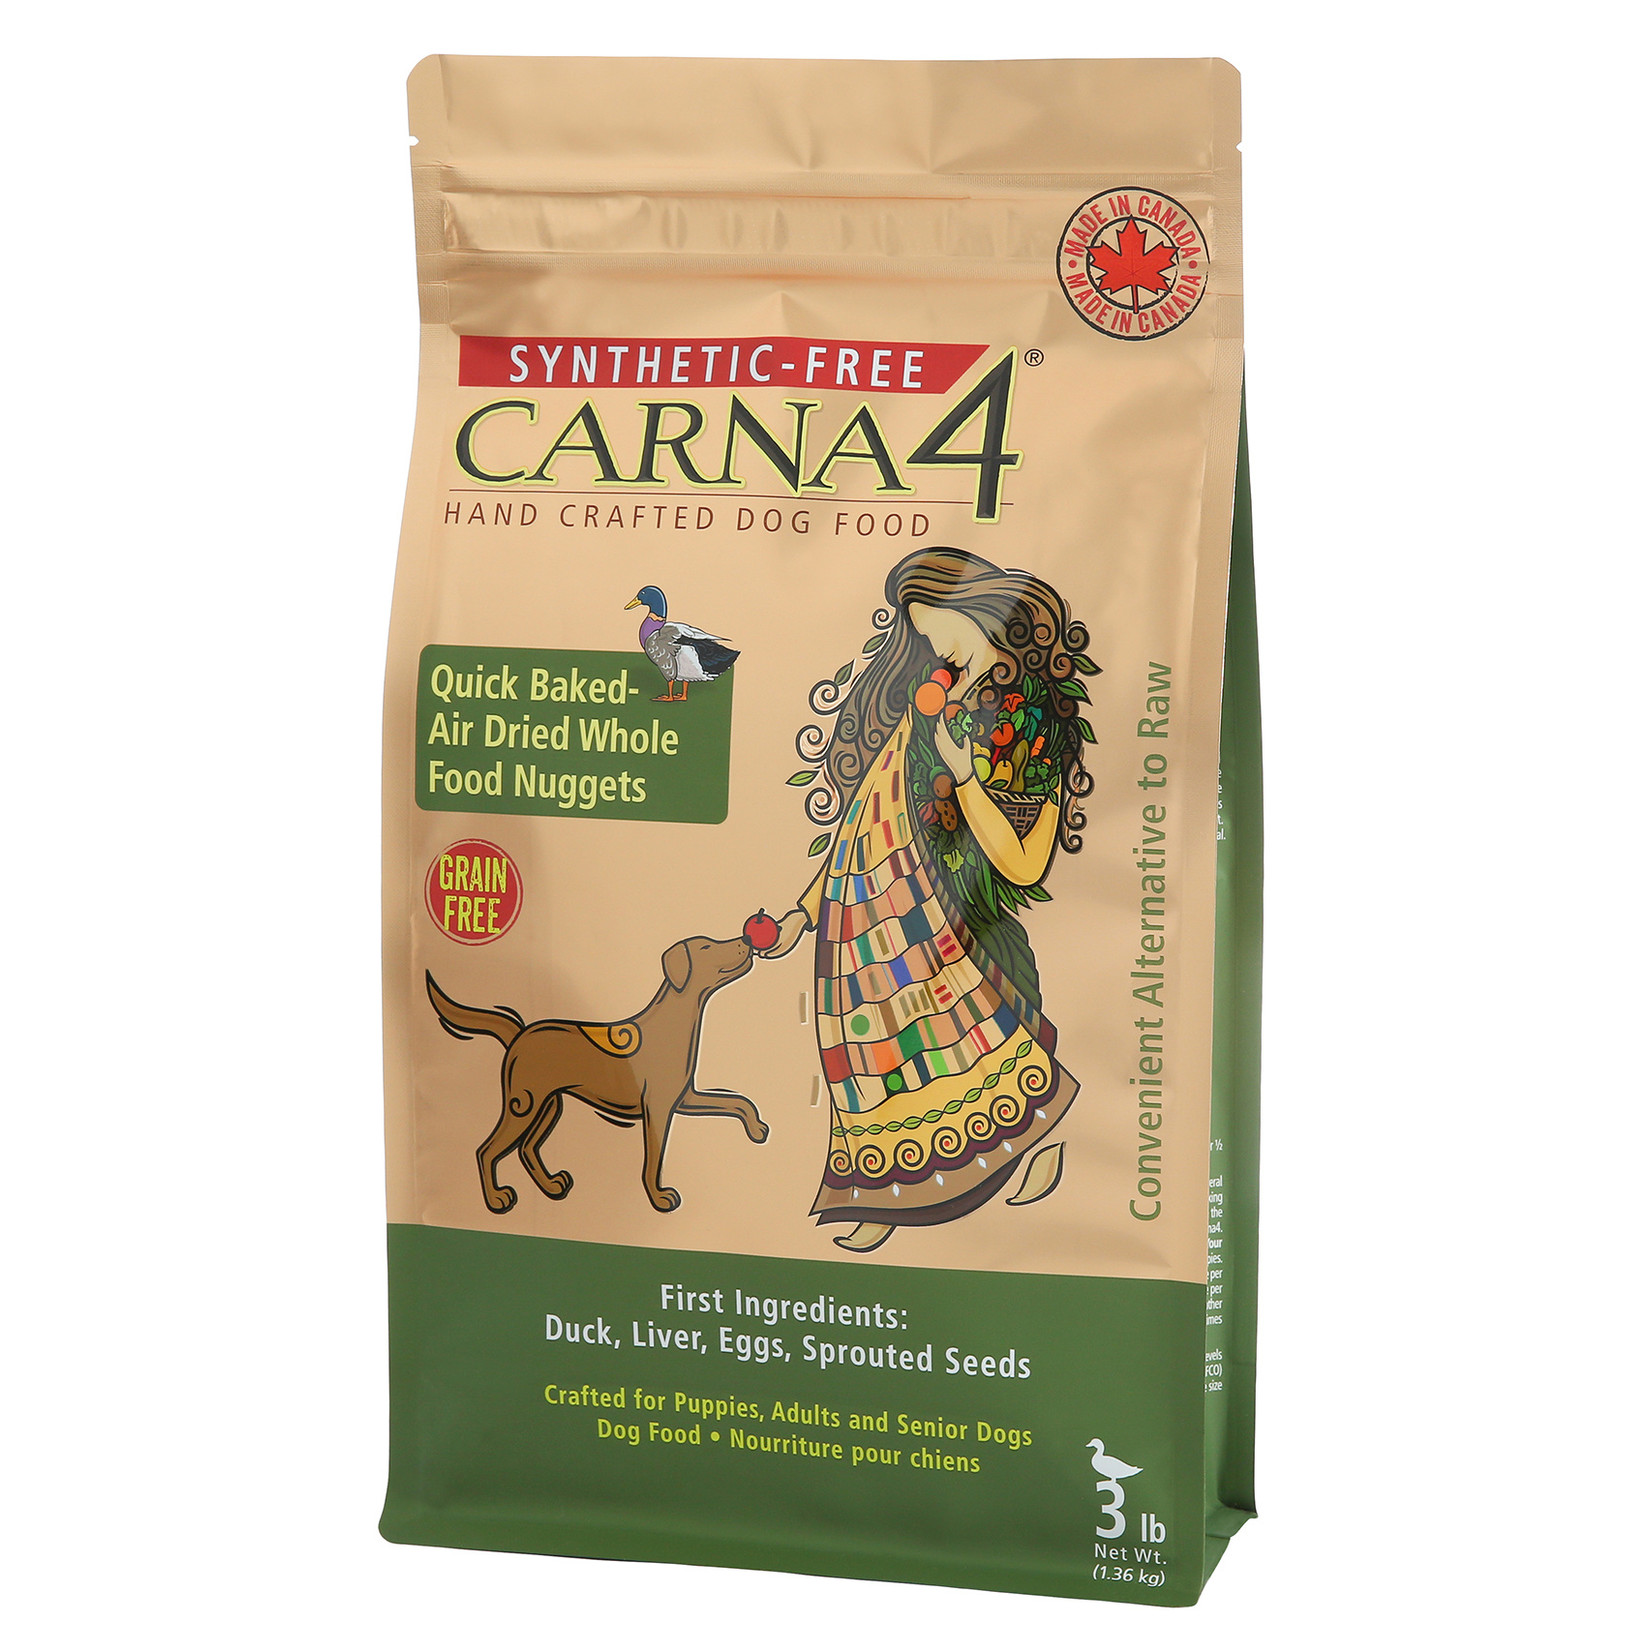 Carna4 Hand Crafted Pet Food Carna4 Hand Crafted Dog Food - Grain Free Quick Baked Duck Formula